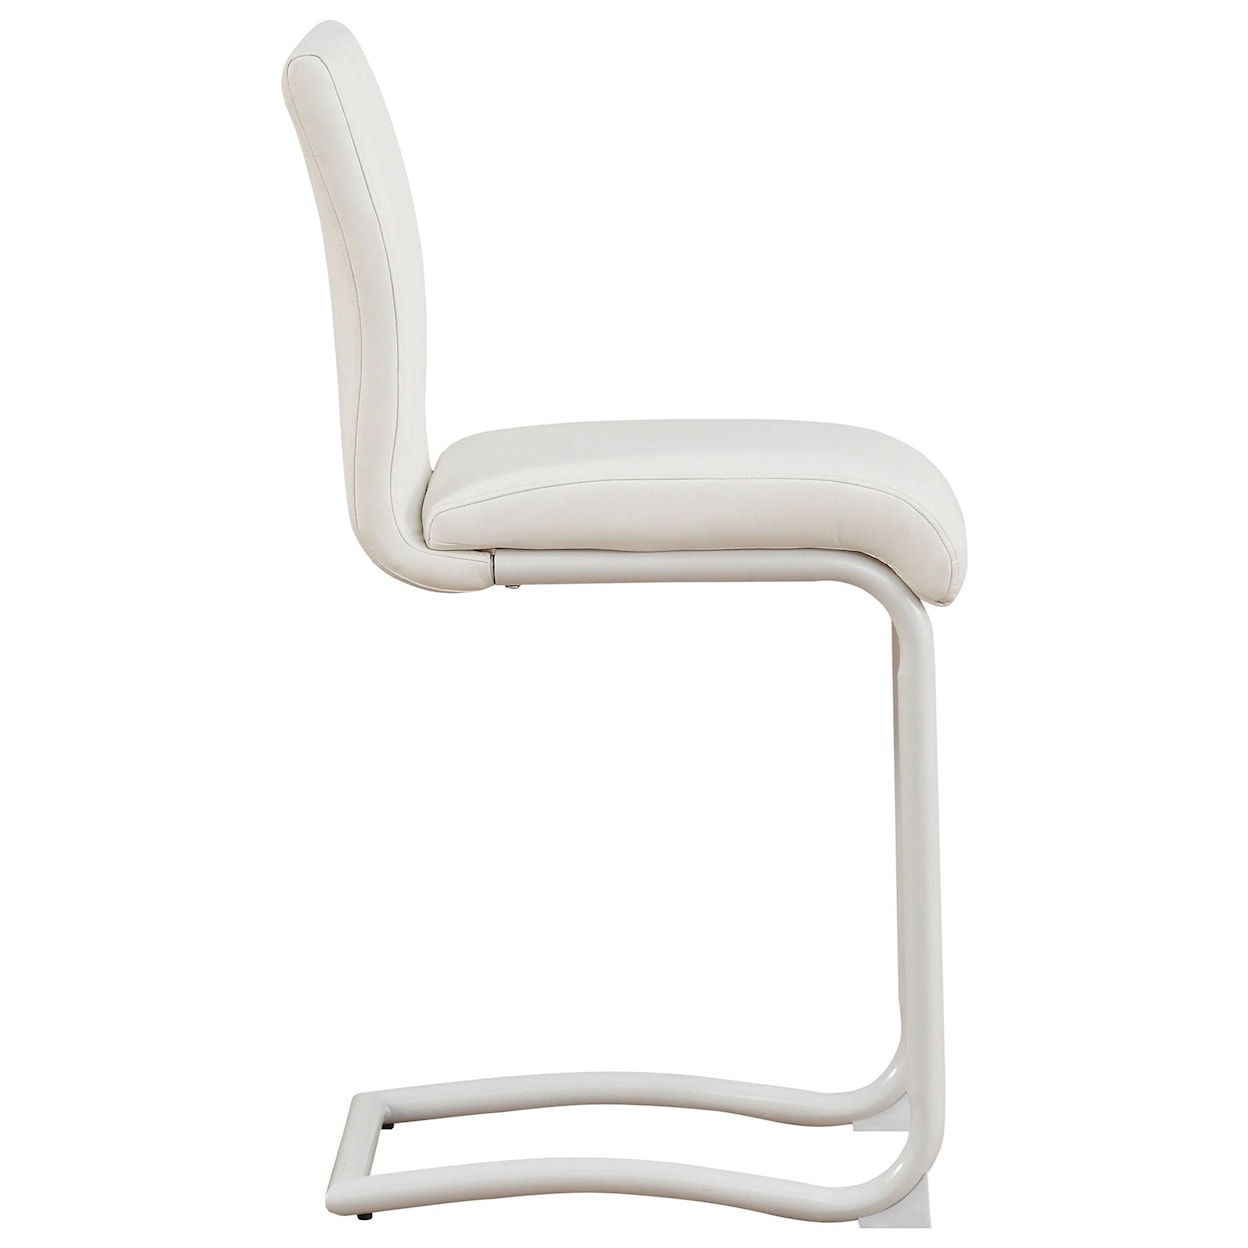 Acme Furniture Gordie Counter Height Chair (Set-2)